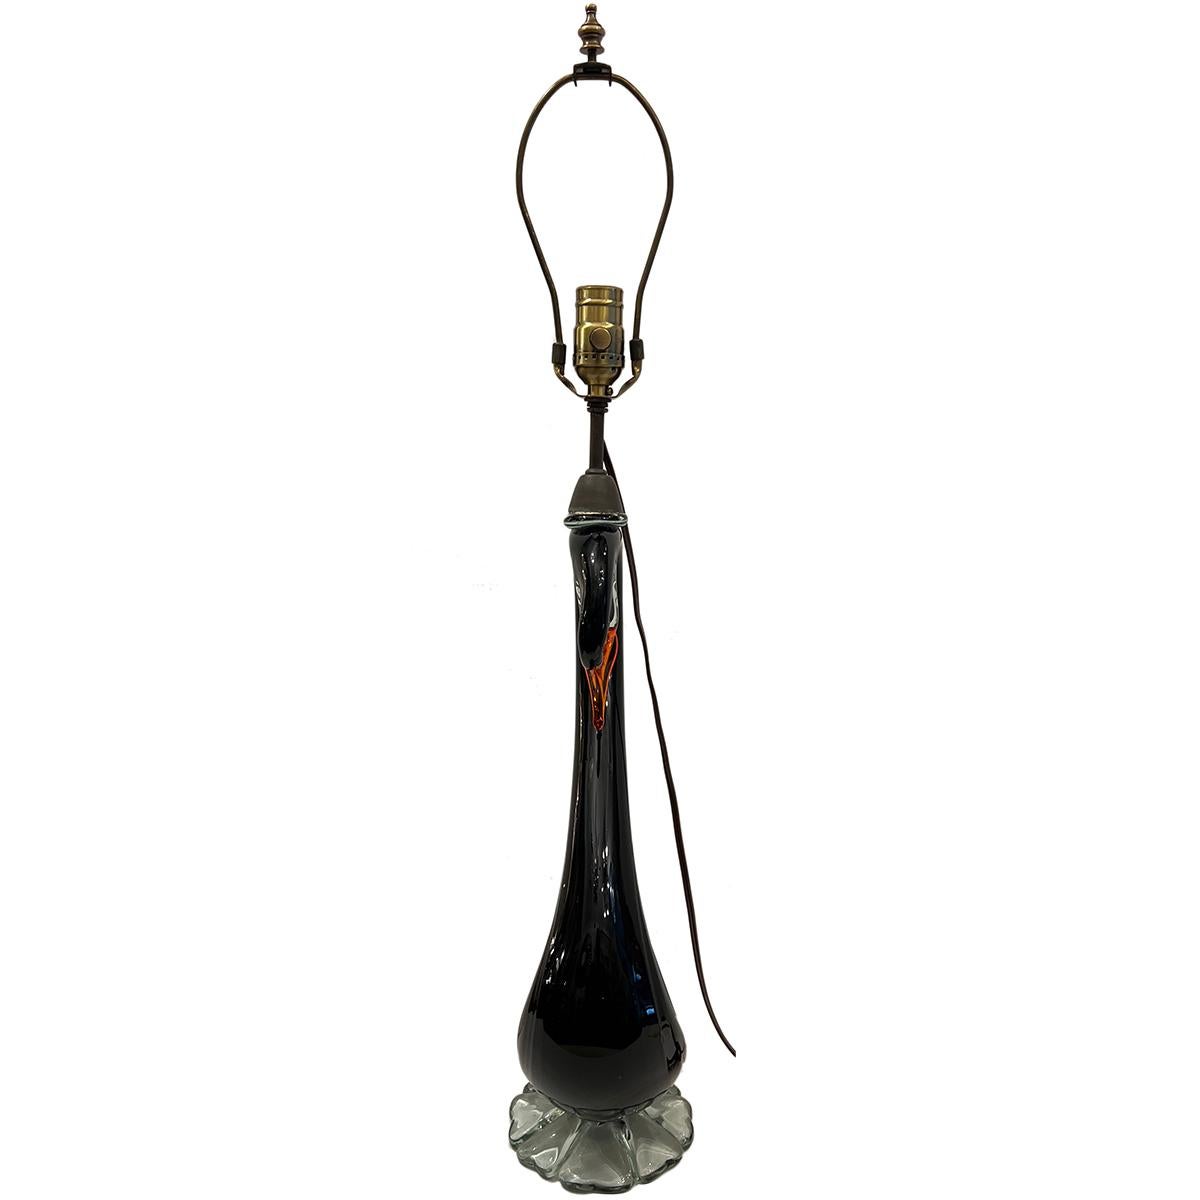 A circa 1950's Italian hand-blown glass swan-shaped table lamp.

Measurements:
Height of body: 20